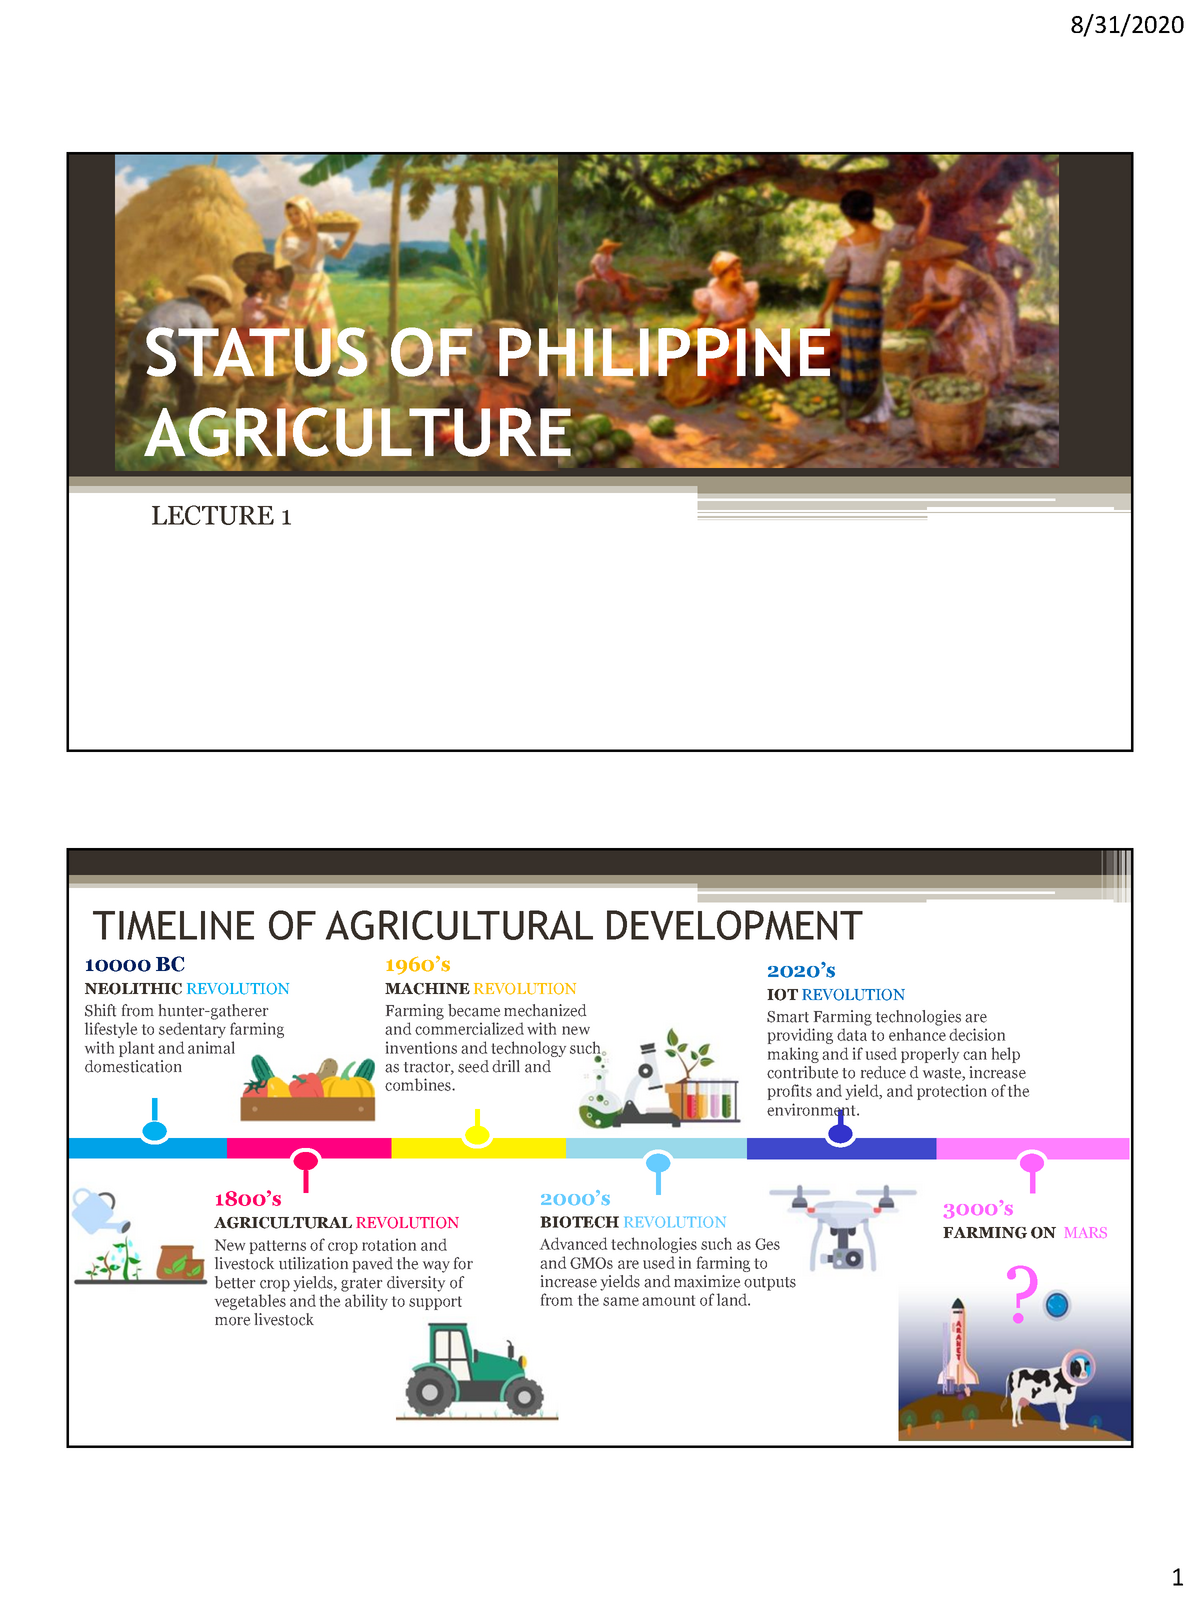 history of agriculture in the philippines essay